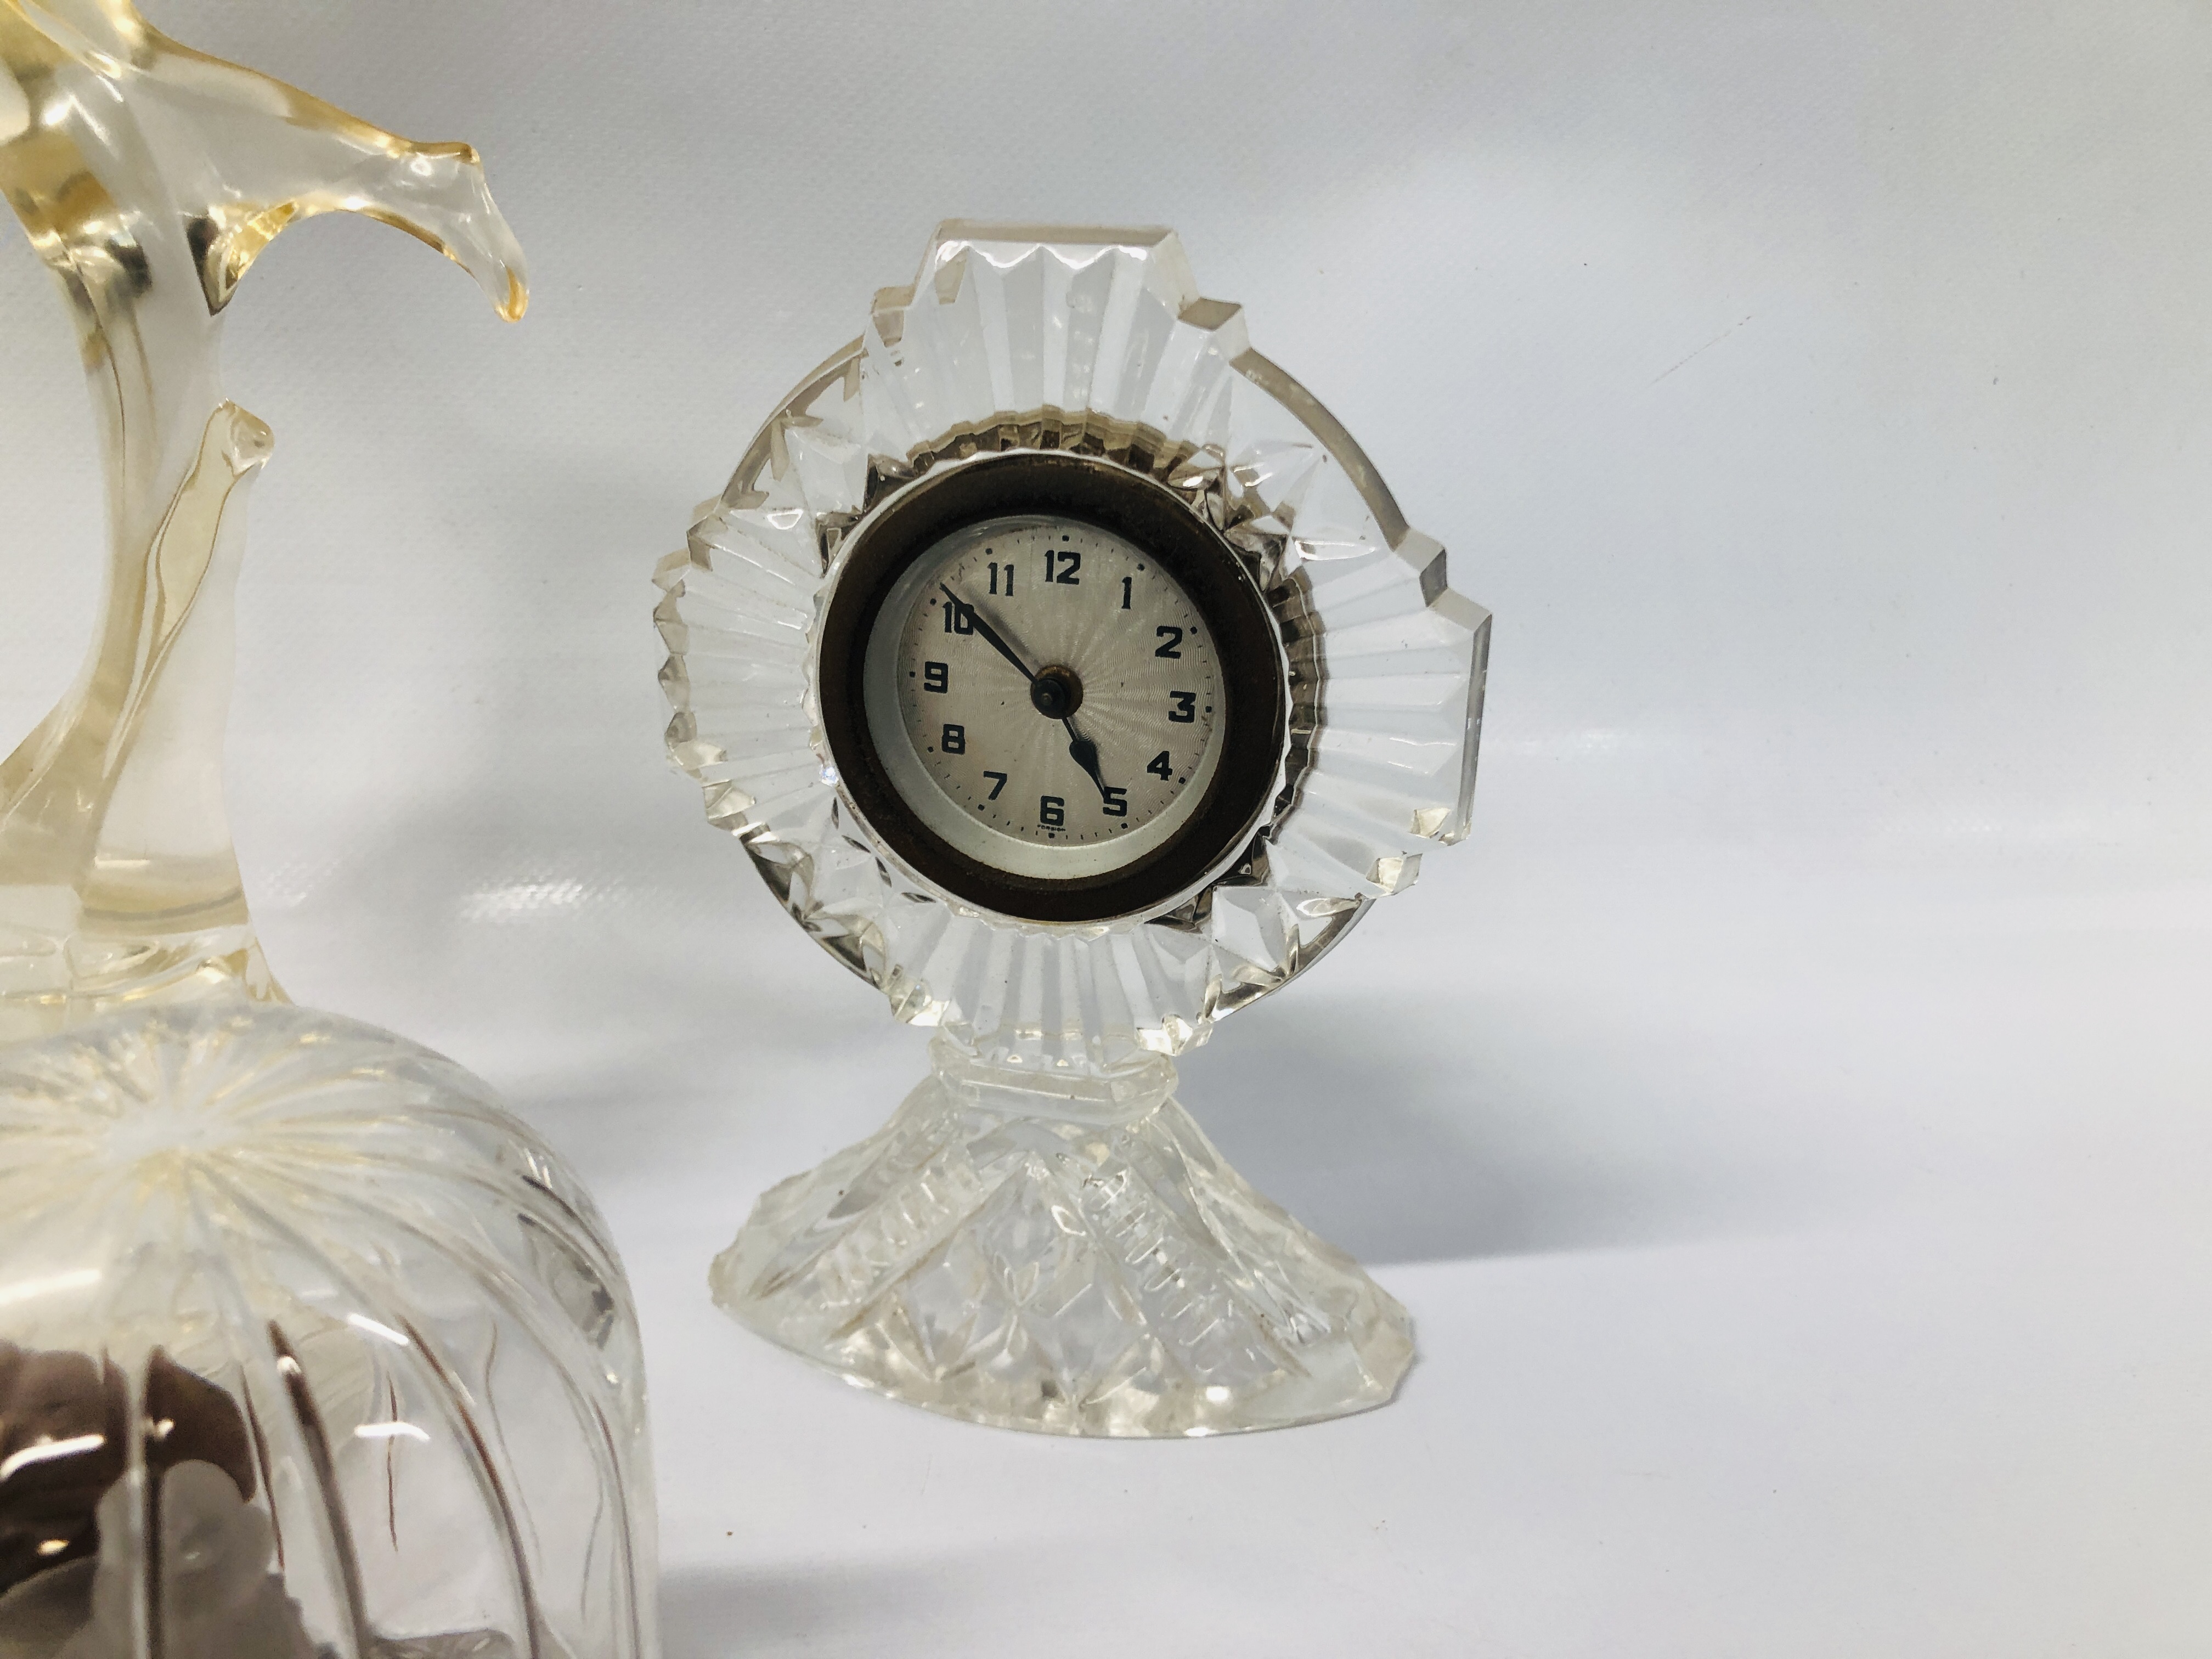 6 X ASSORTED PERFUME BOTTLES, RCR CRYSTAL DANCING GROUP, VINTAGE GLASS DRESSING TABLE CLOCK, ETC. - Image 9 of 12